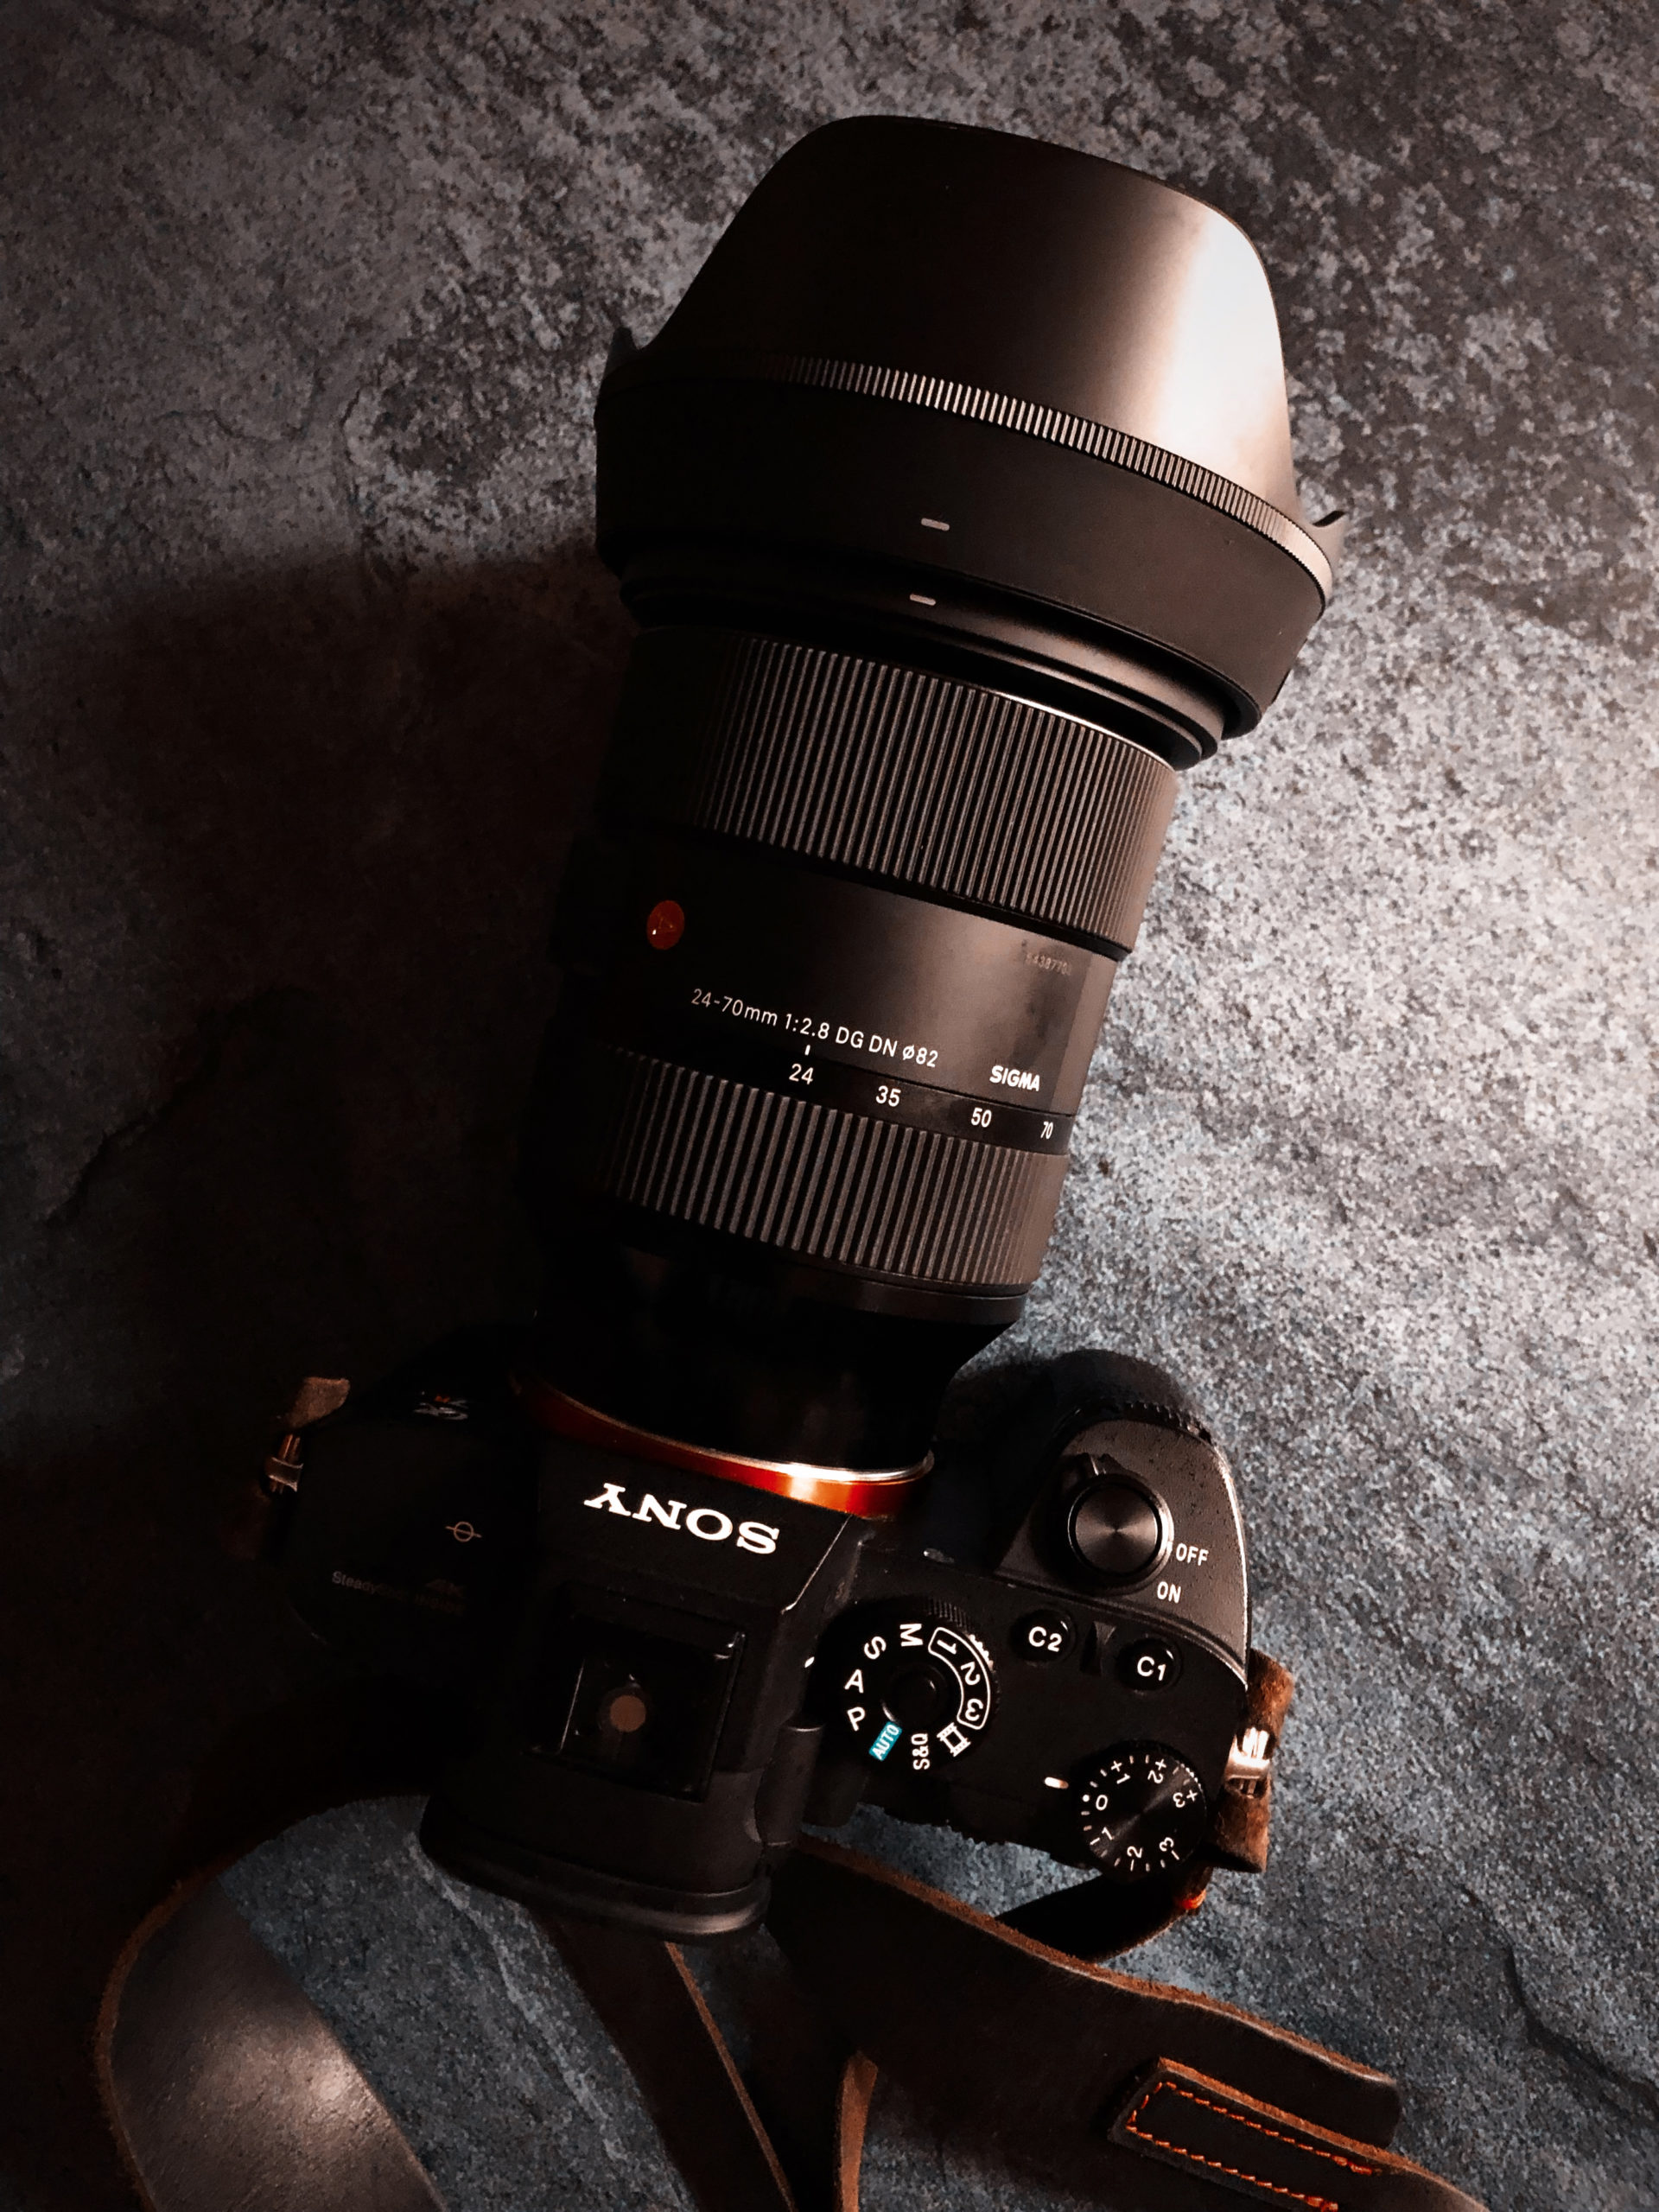 Why the Sigma 24-70mm F2.8 DG DN Art Doesn’t Have Stabilization